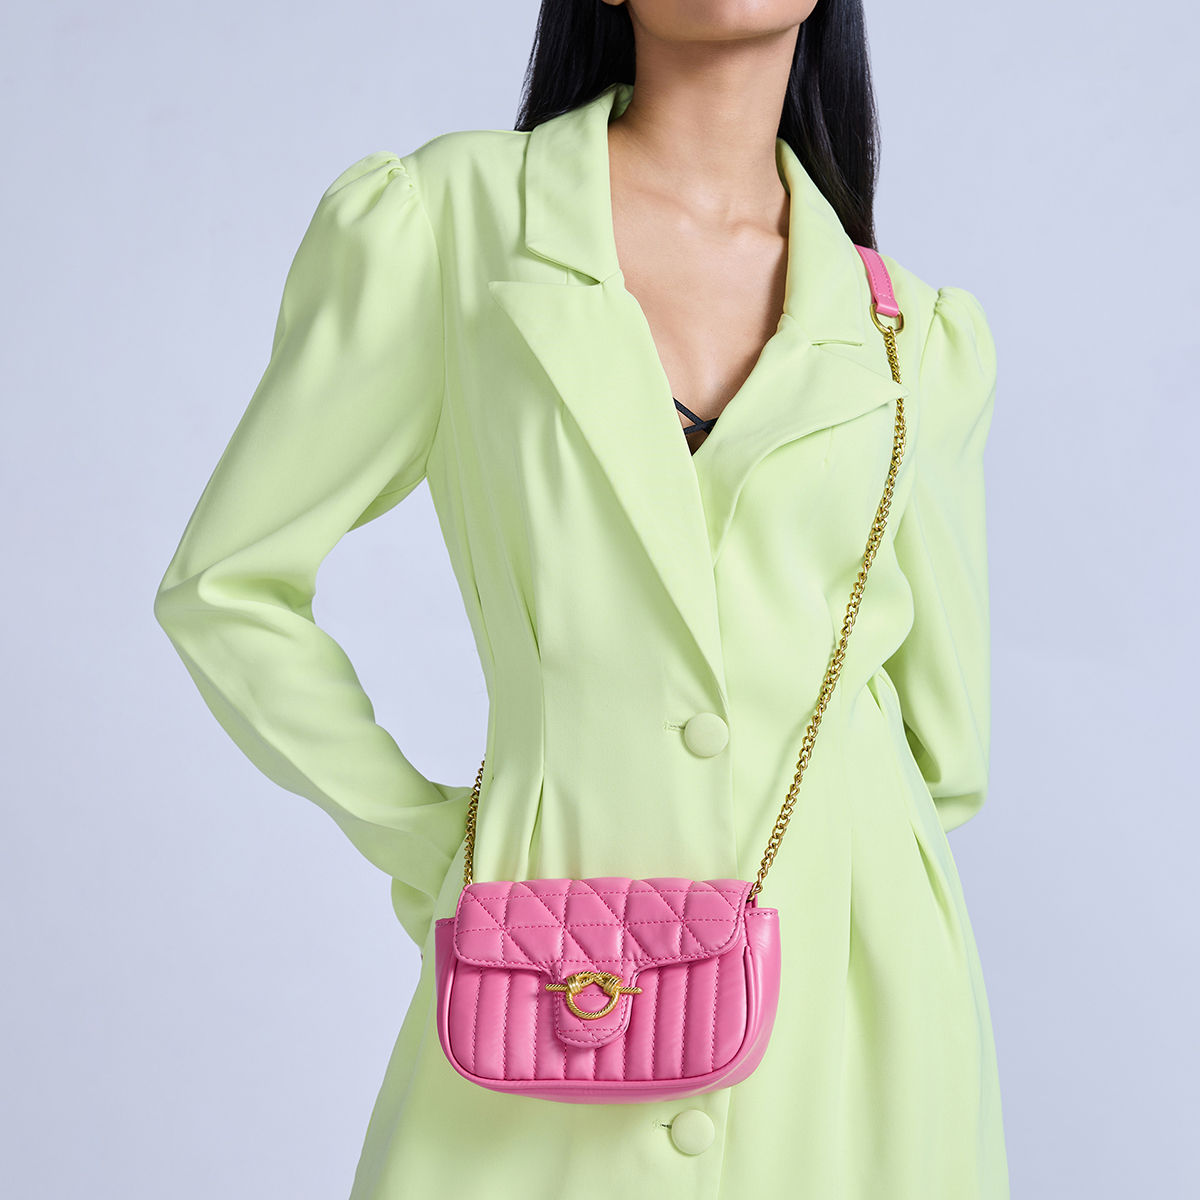 JiHa Hot Pink Quilted Double Chain Shoulder and Sling Bag At Nykaa Fashion - Your Online Shopping Store